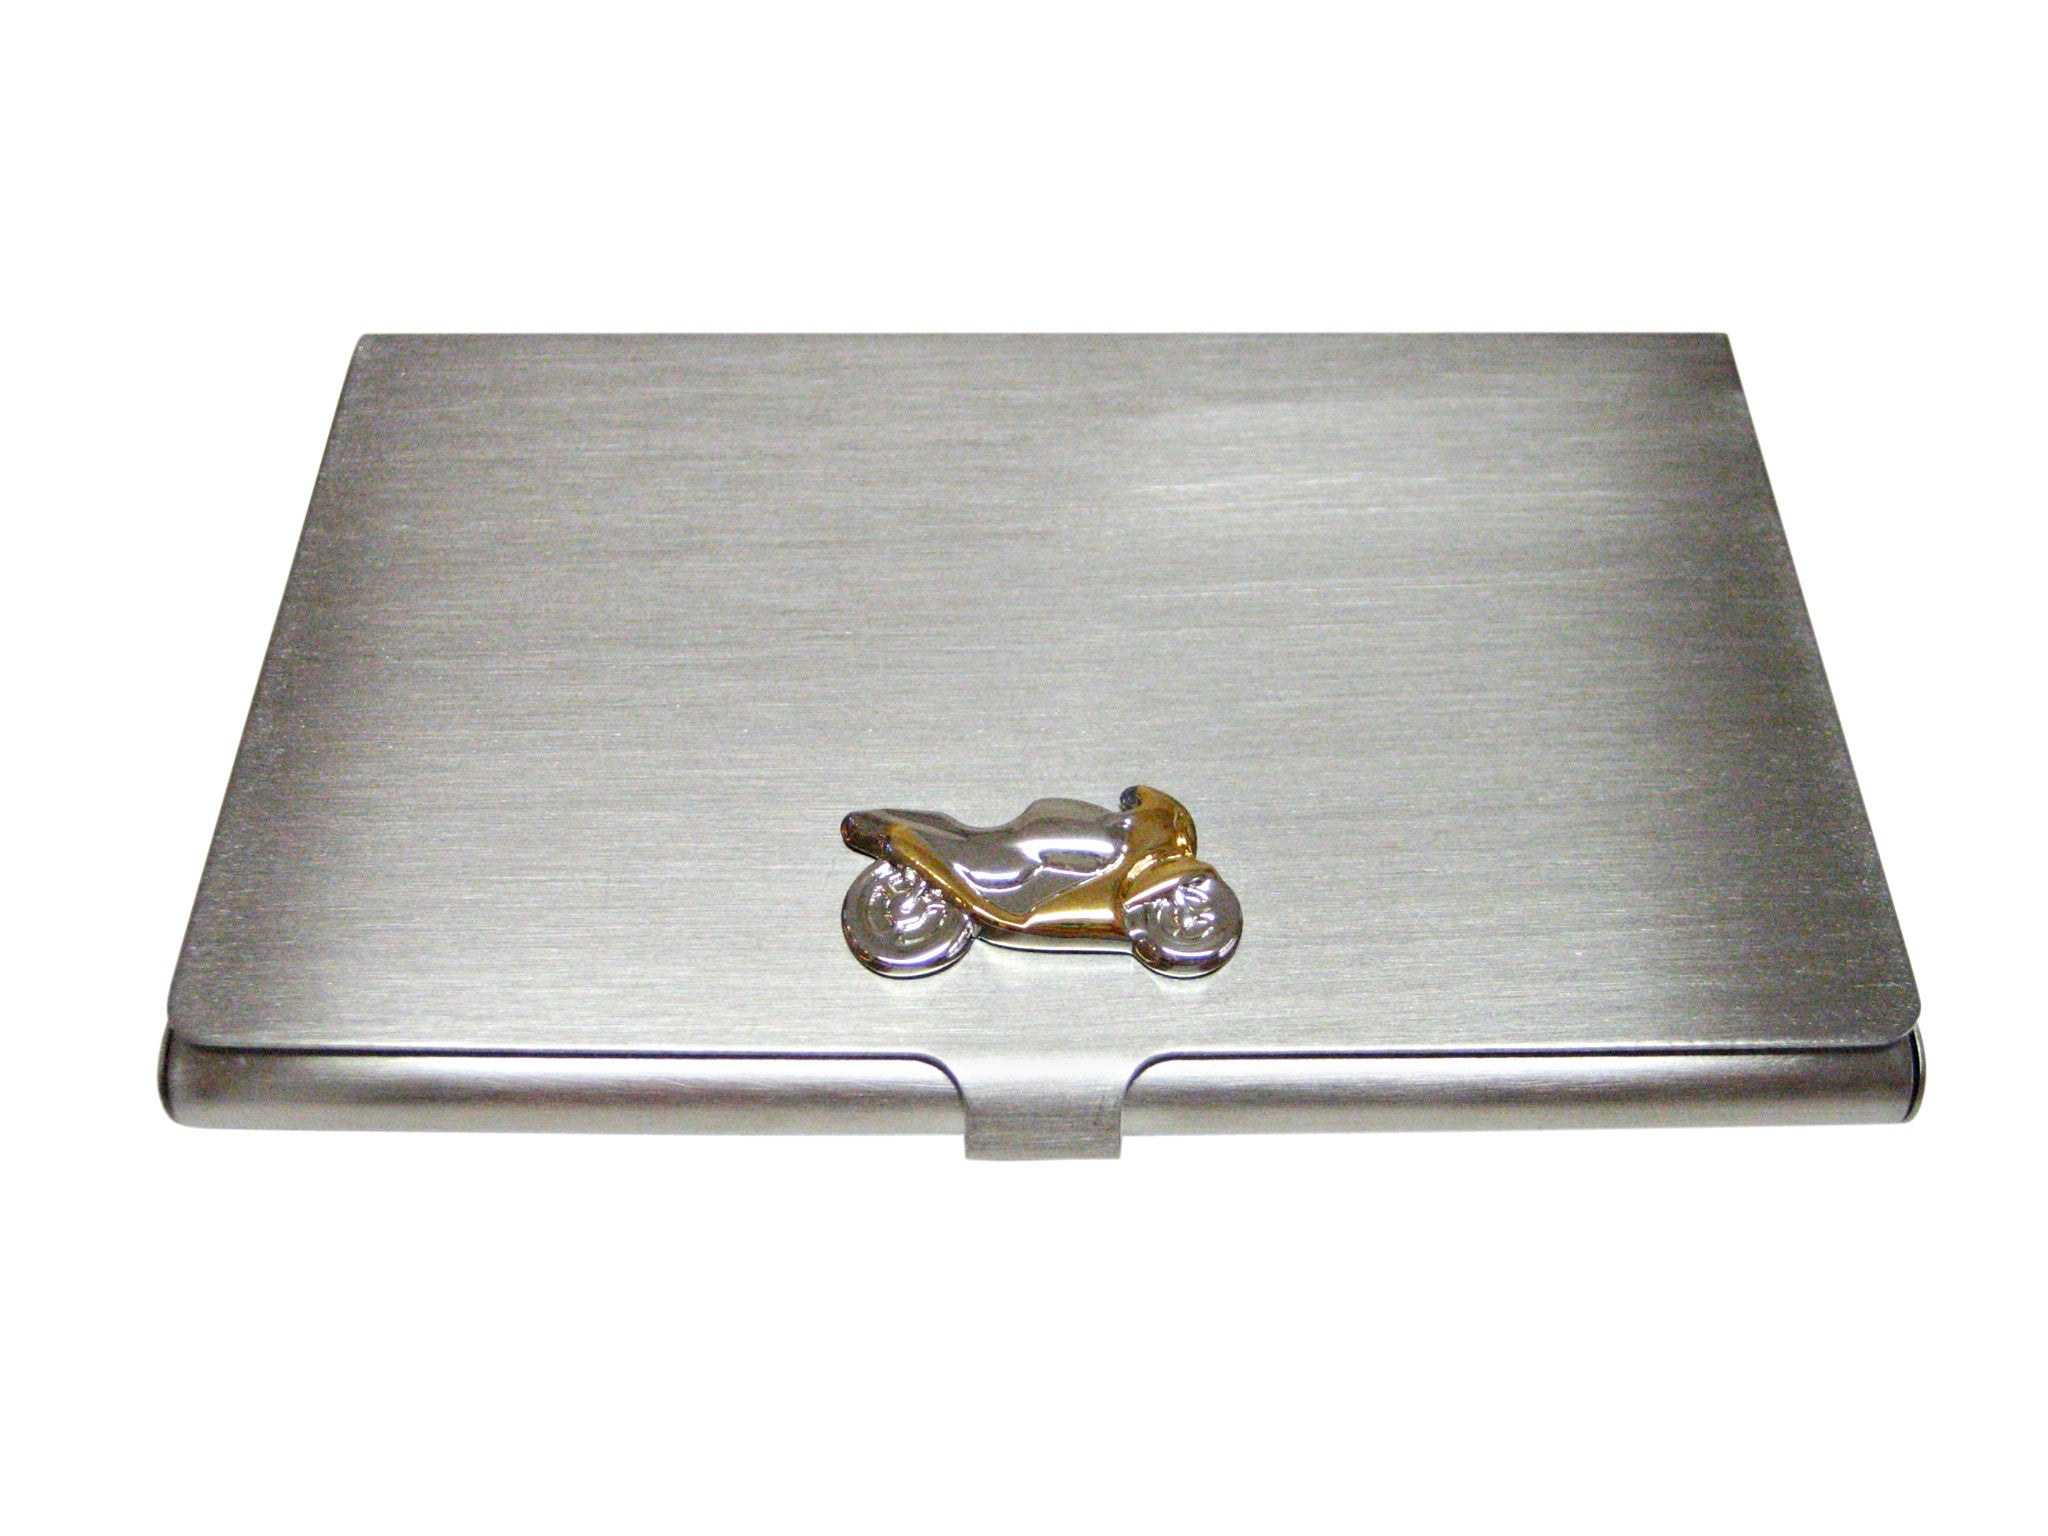 Gold and Silver Toned Motorcycle Business Card Holder